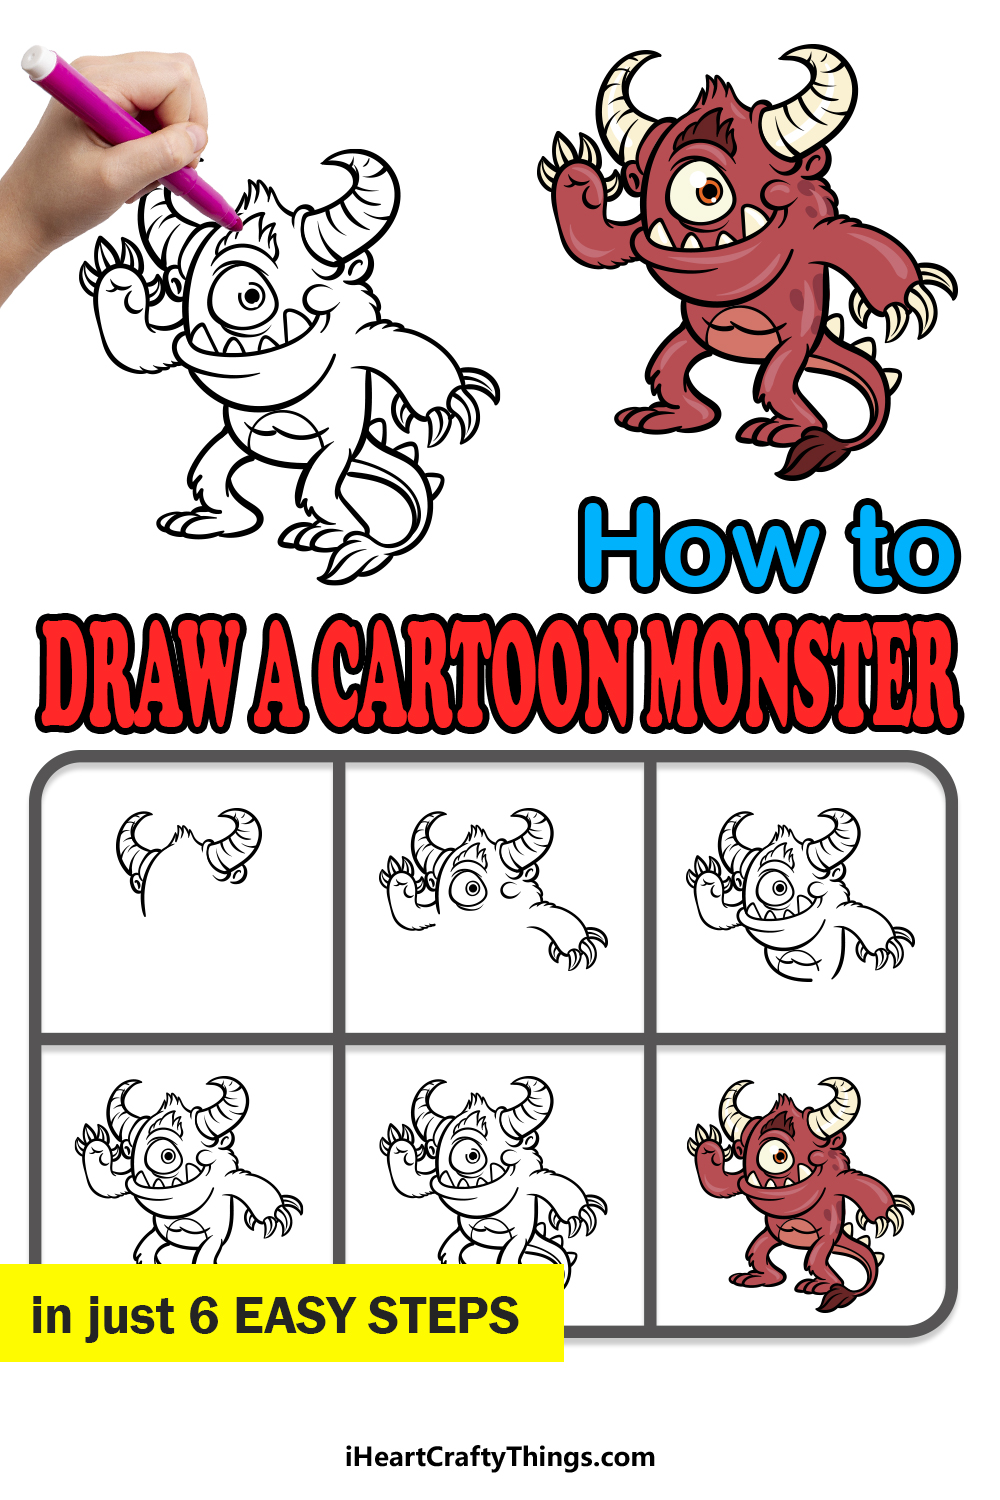 Cartoon Monster Drawing - How To Draw A Cartoon Monster Step By Step